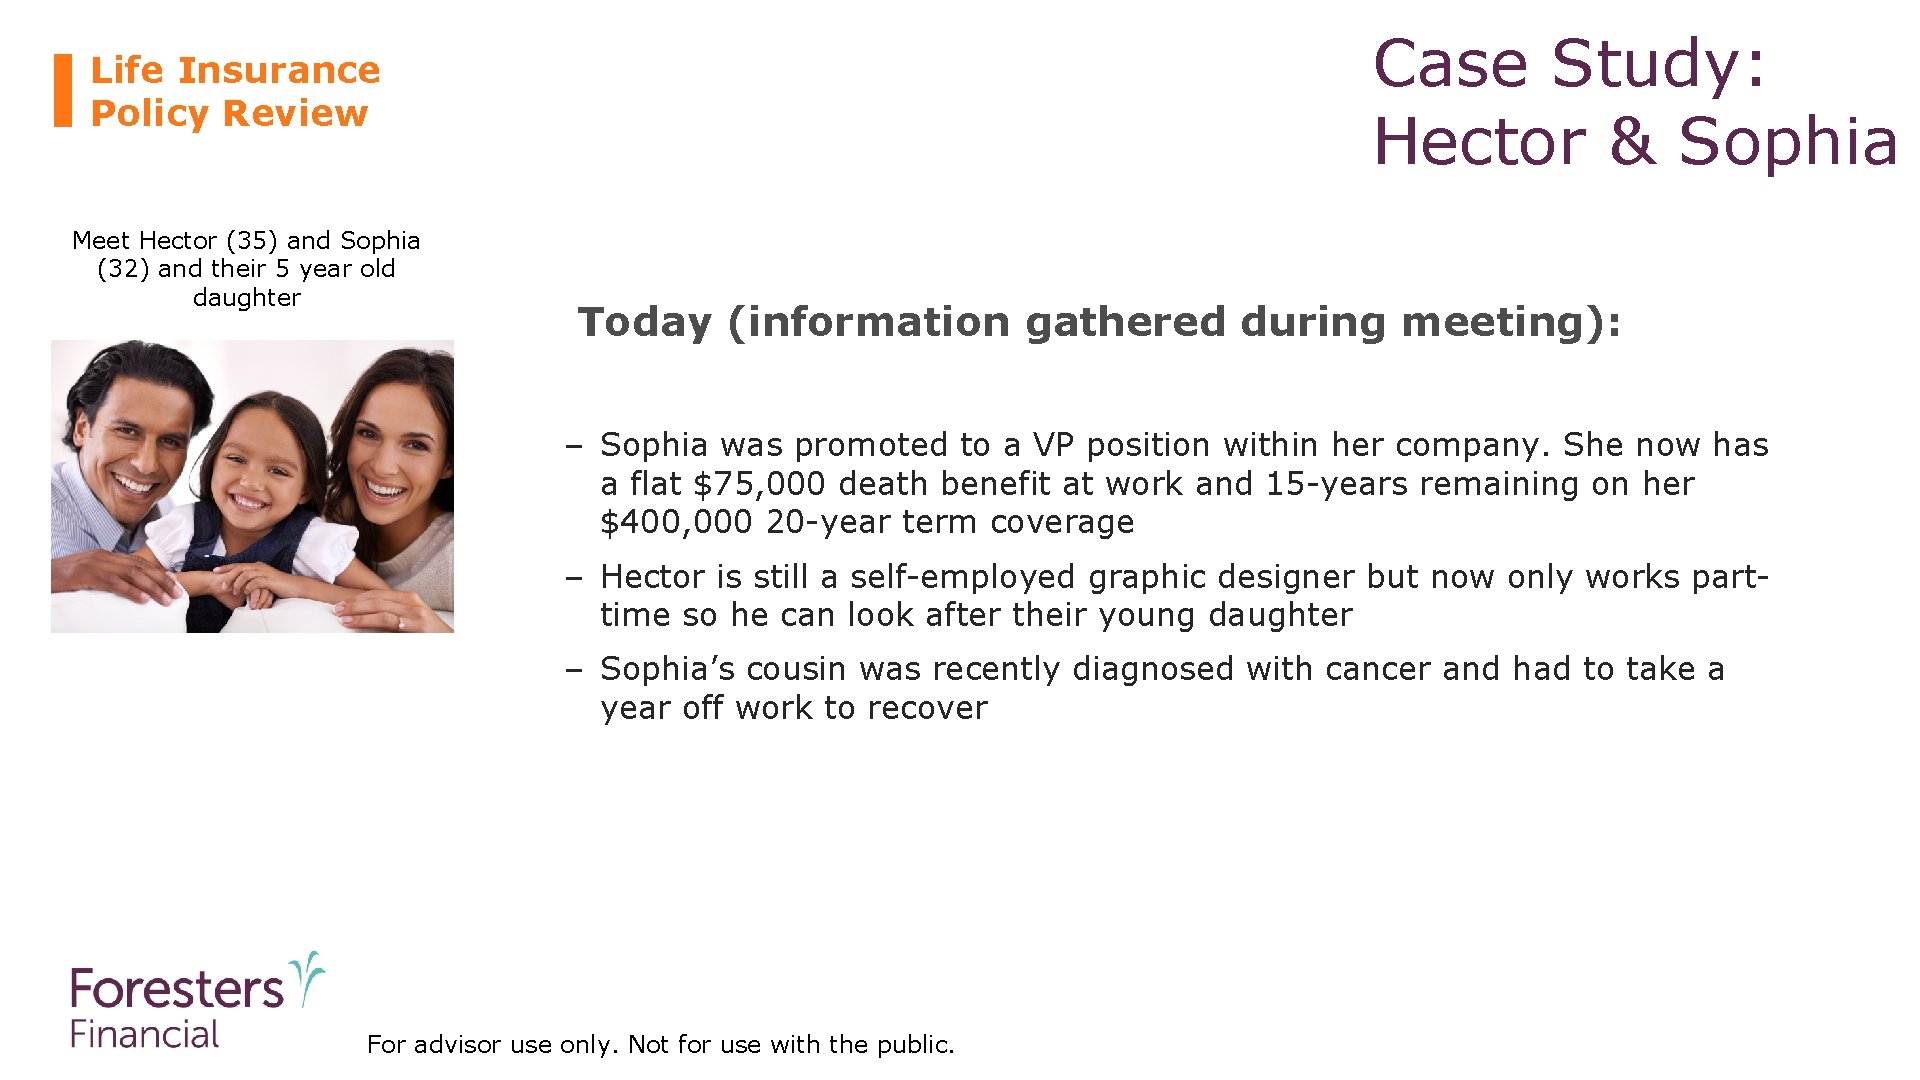 Case Study: Hector & Sophia Life Insurance Policy Review Meet Hector (35) and Sophia